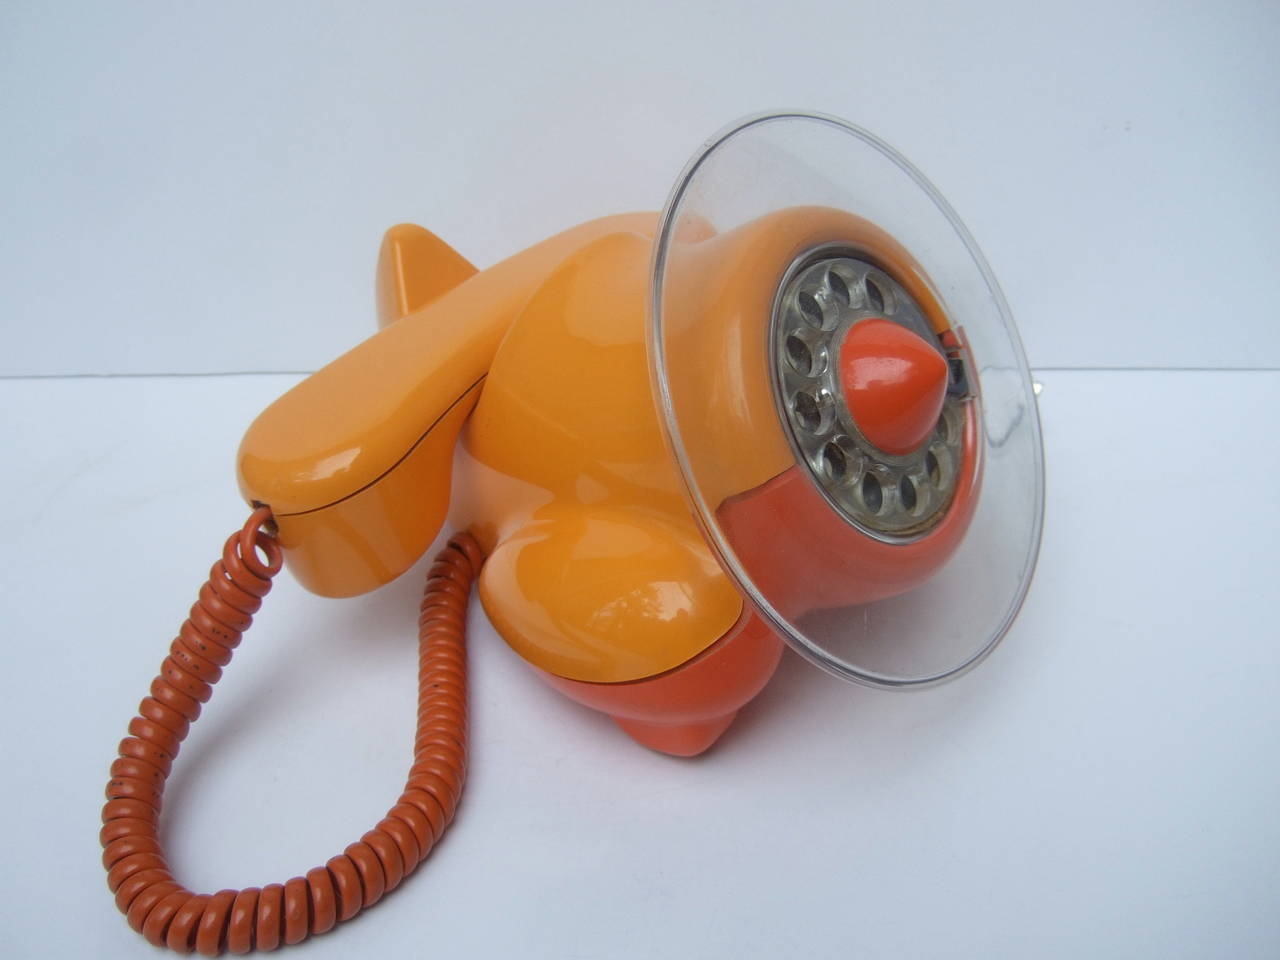 Whimsical mod novelty airplane telephone c 1970s
The unique rare telephone is designed in the shape of an airplane with a clear lucite propeller rotary dial. The avant-garde telephone is designed with sleek tangerine & mellen color contrasting